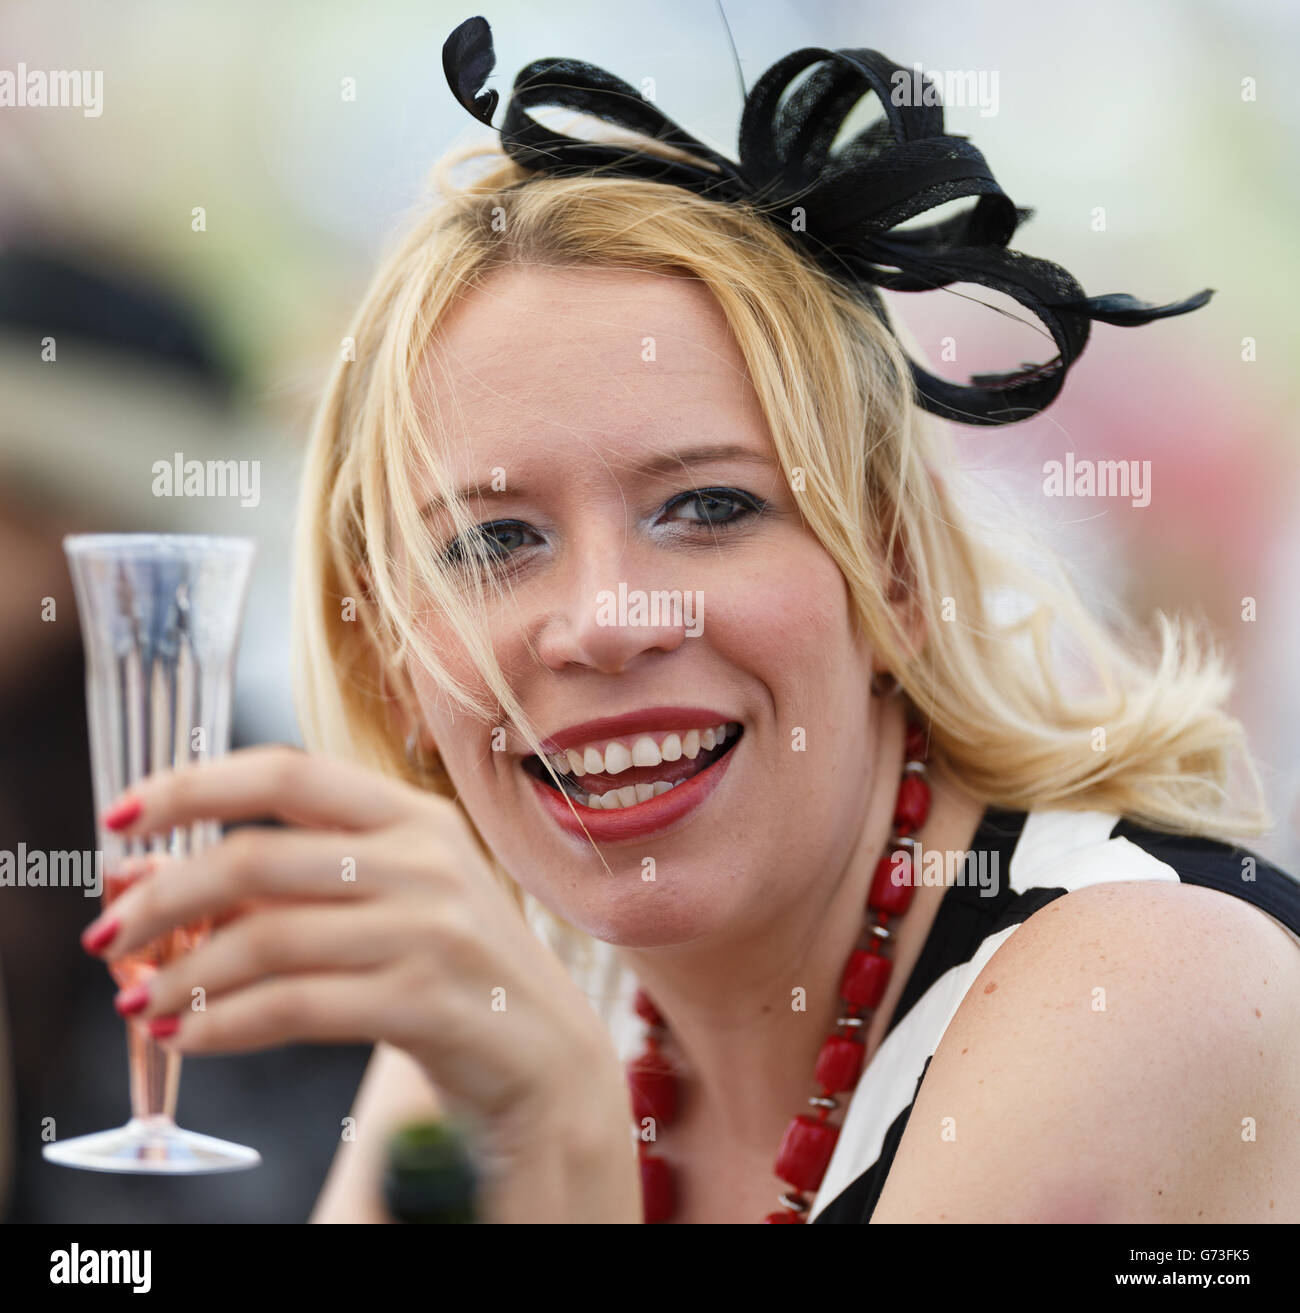 Horse Racing - Investec Ladies Day 2014 - Epsom Downs Racecourse. A racegoer enjoys her day at the races Stock Photo